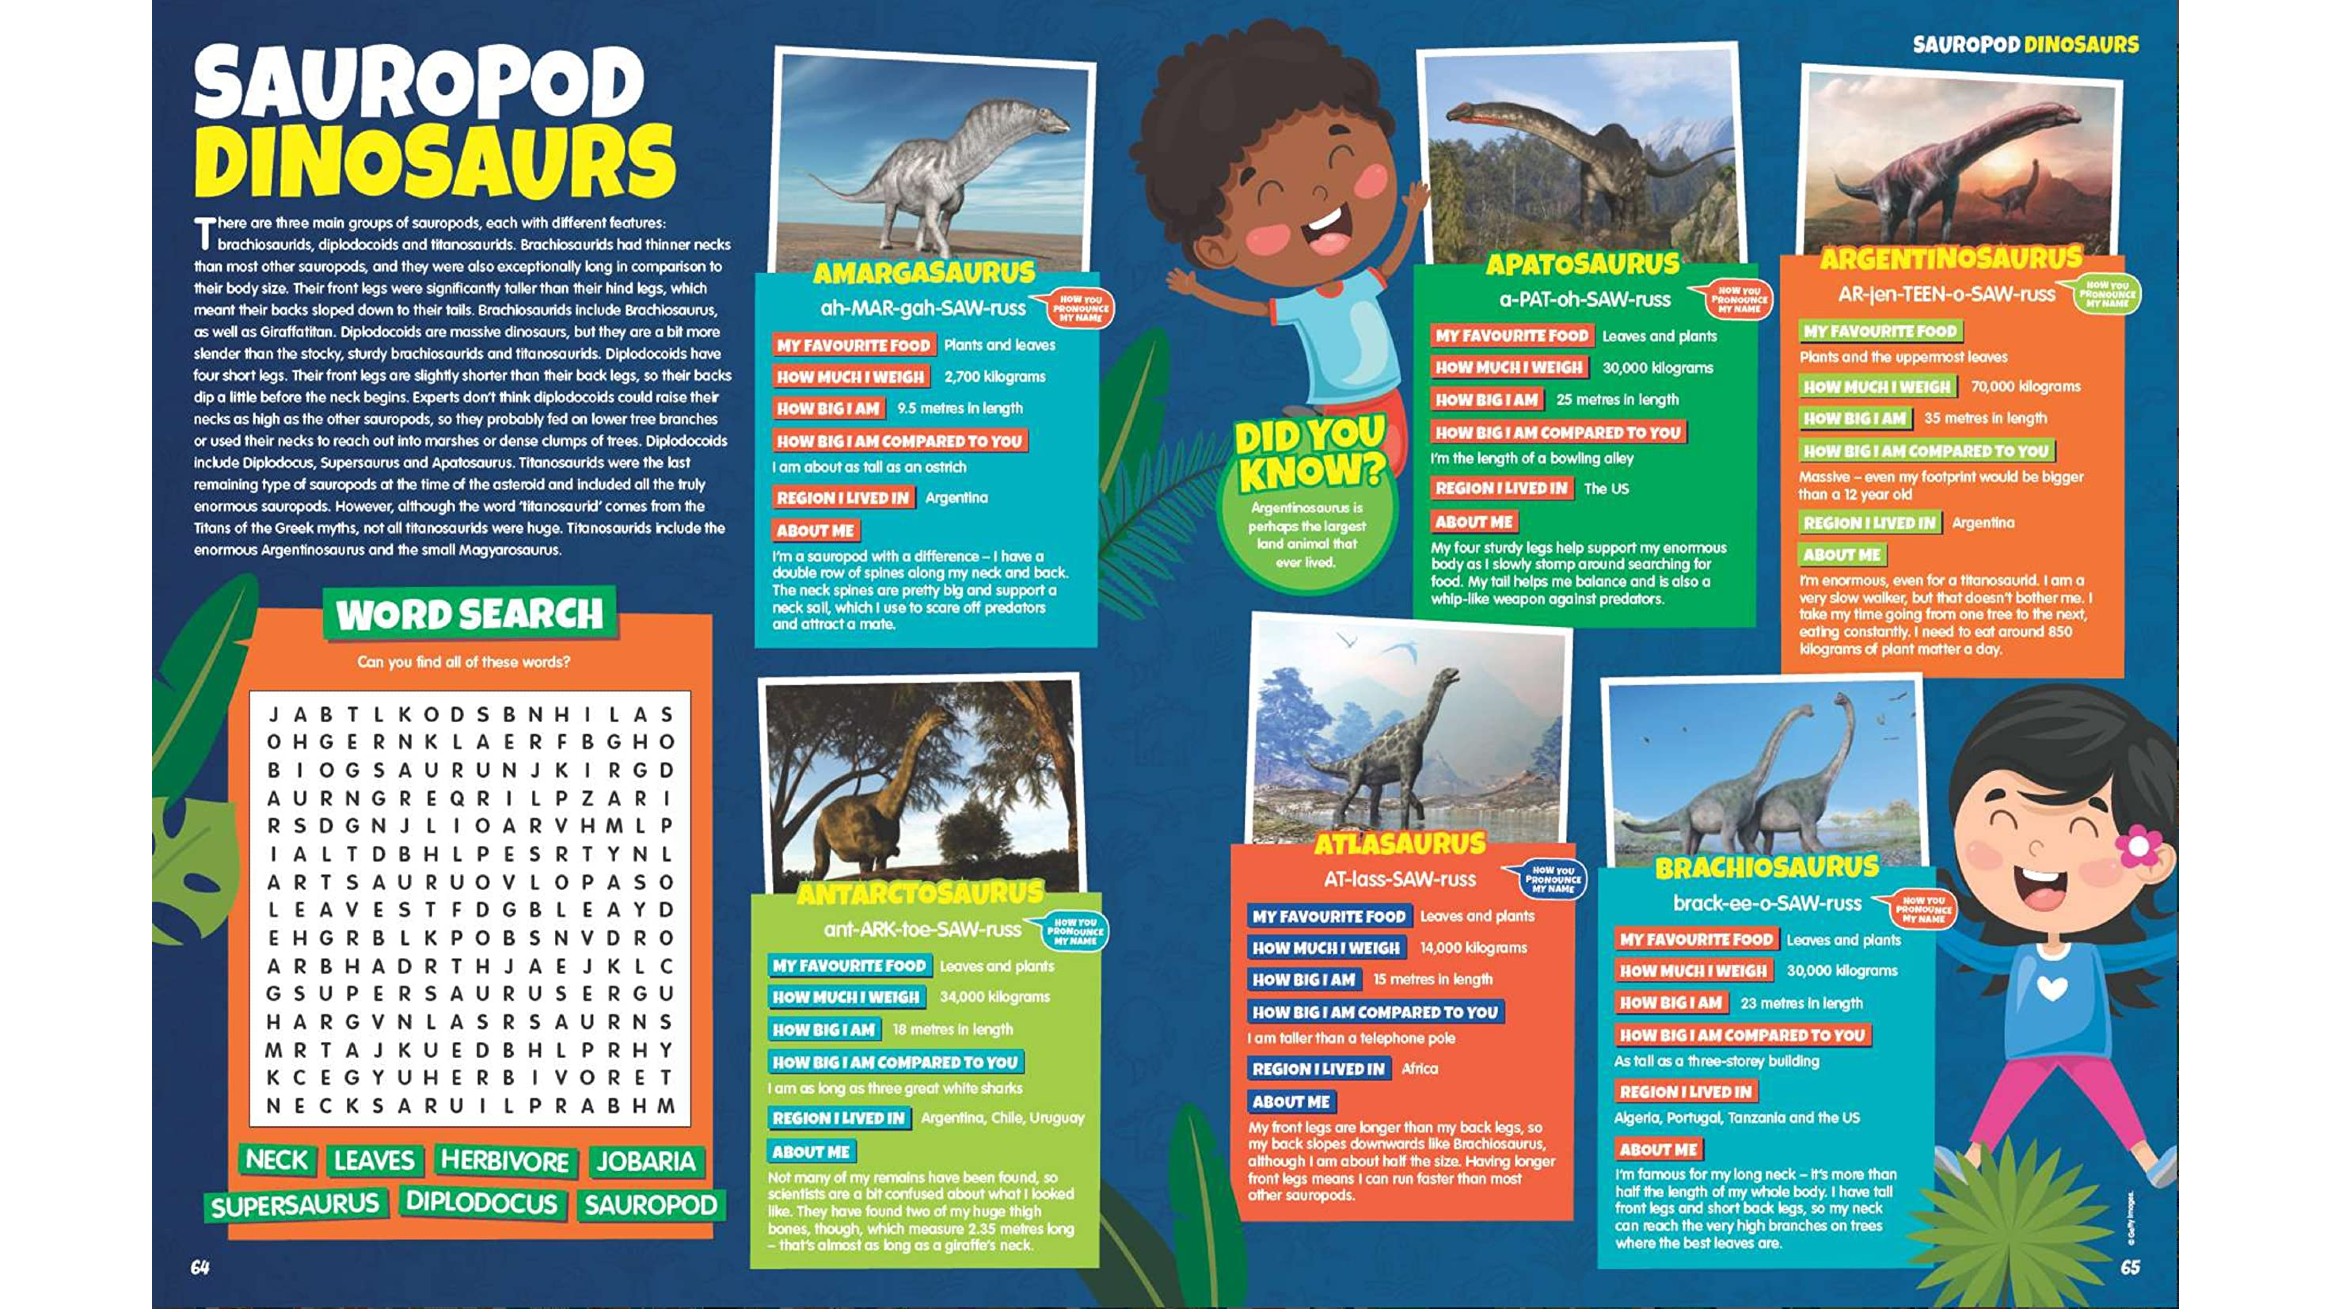 A spread within Future Genius' dinosaur edition . The spread includes several sauropod dinosaurs and a word search